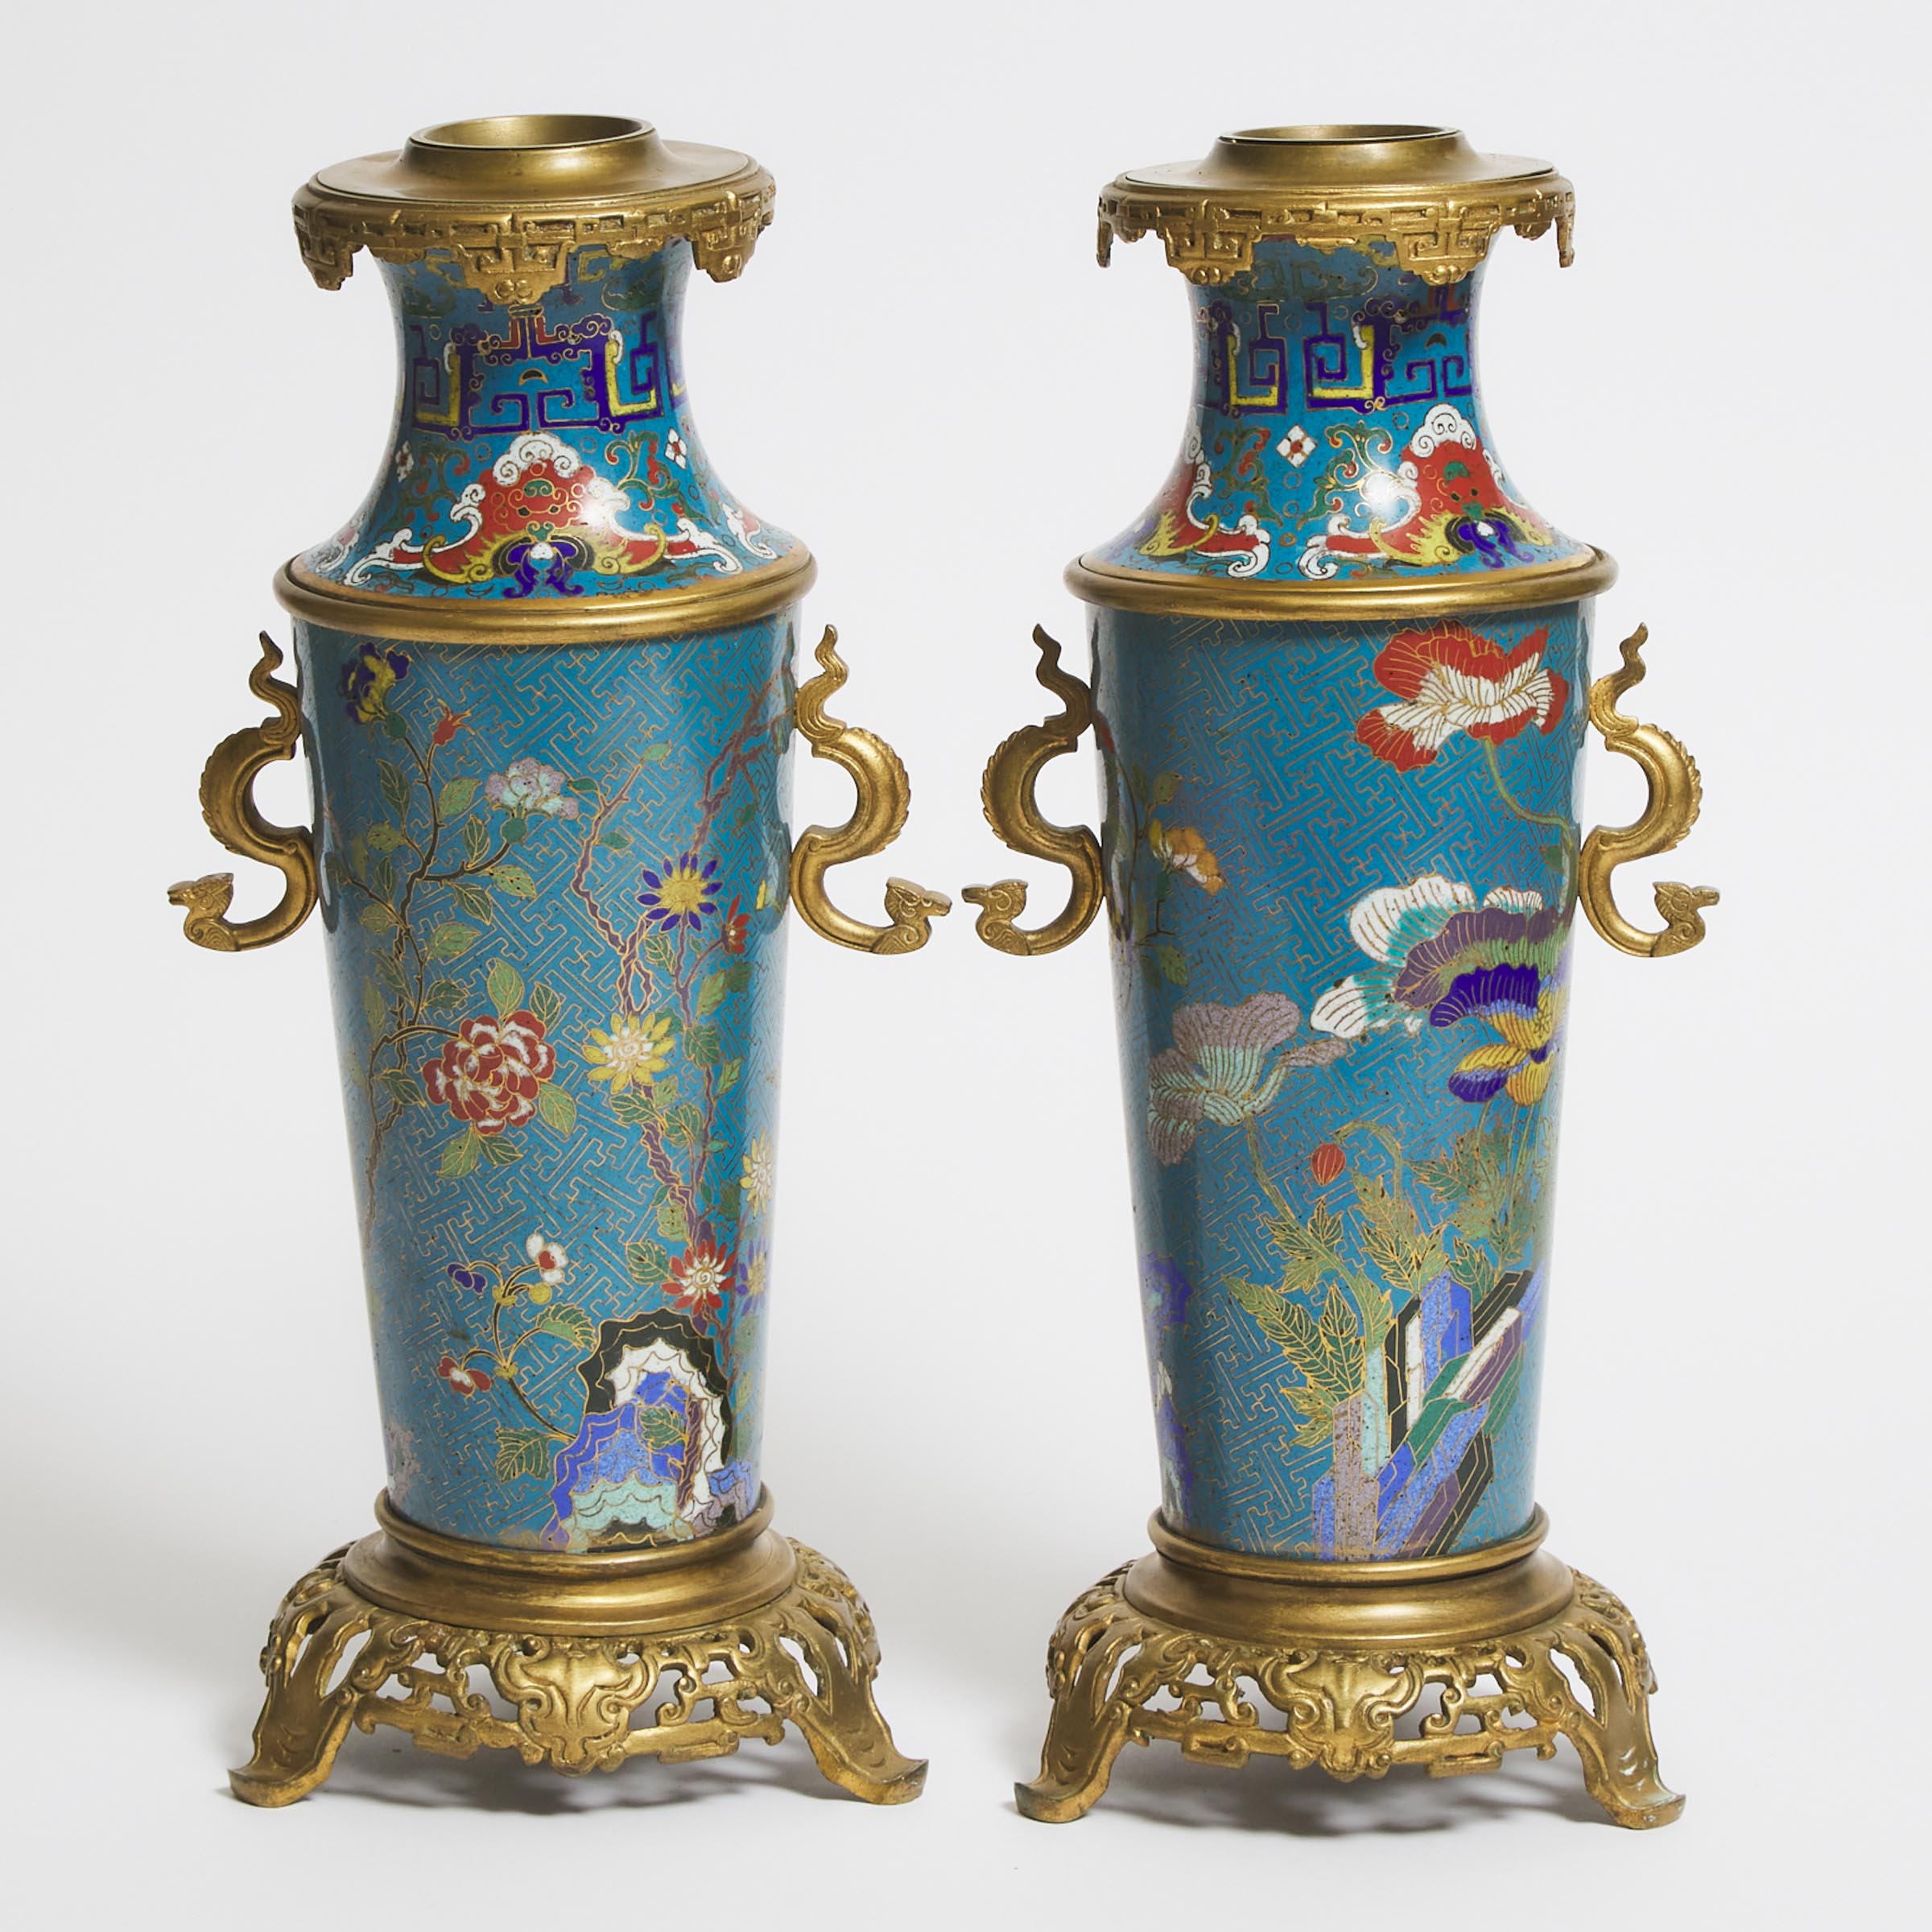 A Pair of Ormolu-Mounted Chinese